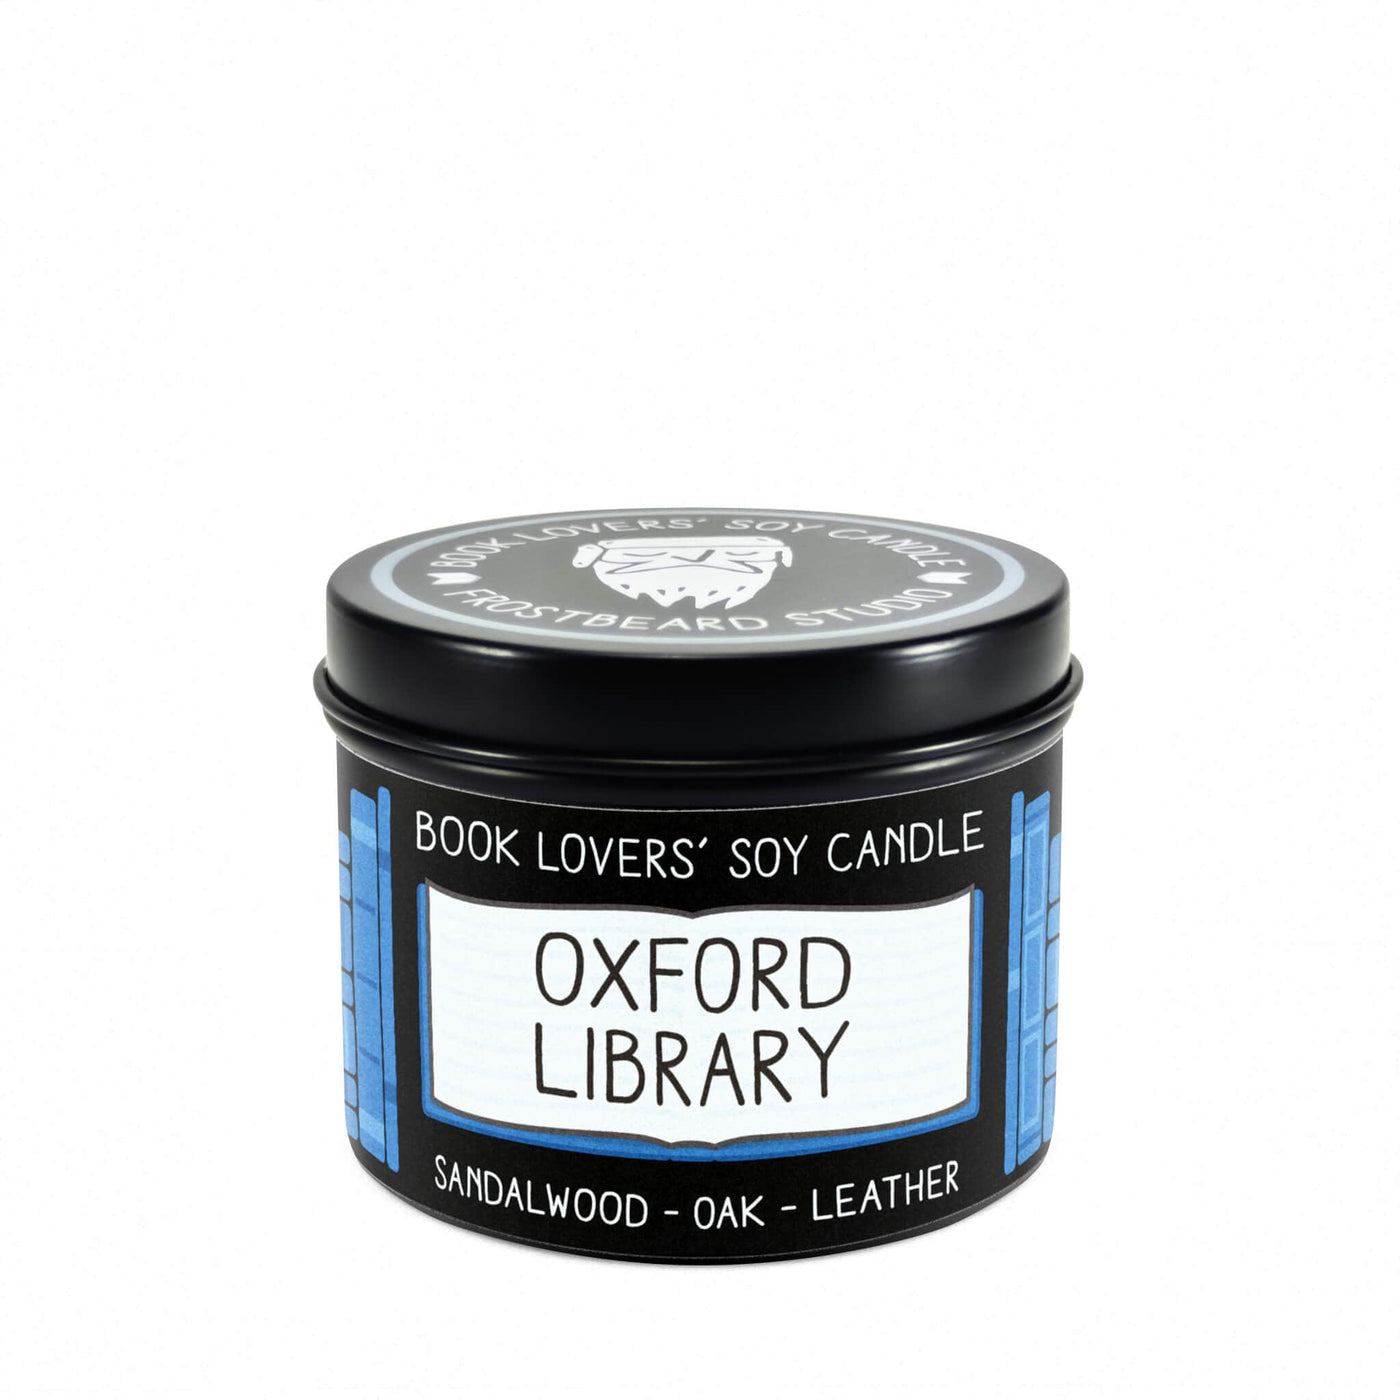 Oxford Library  -  4 oz Tin  -  Book Lovers' Soy Candle  -  Frostbeard Studio